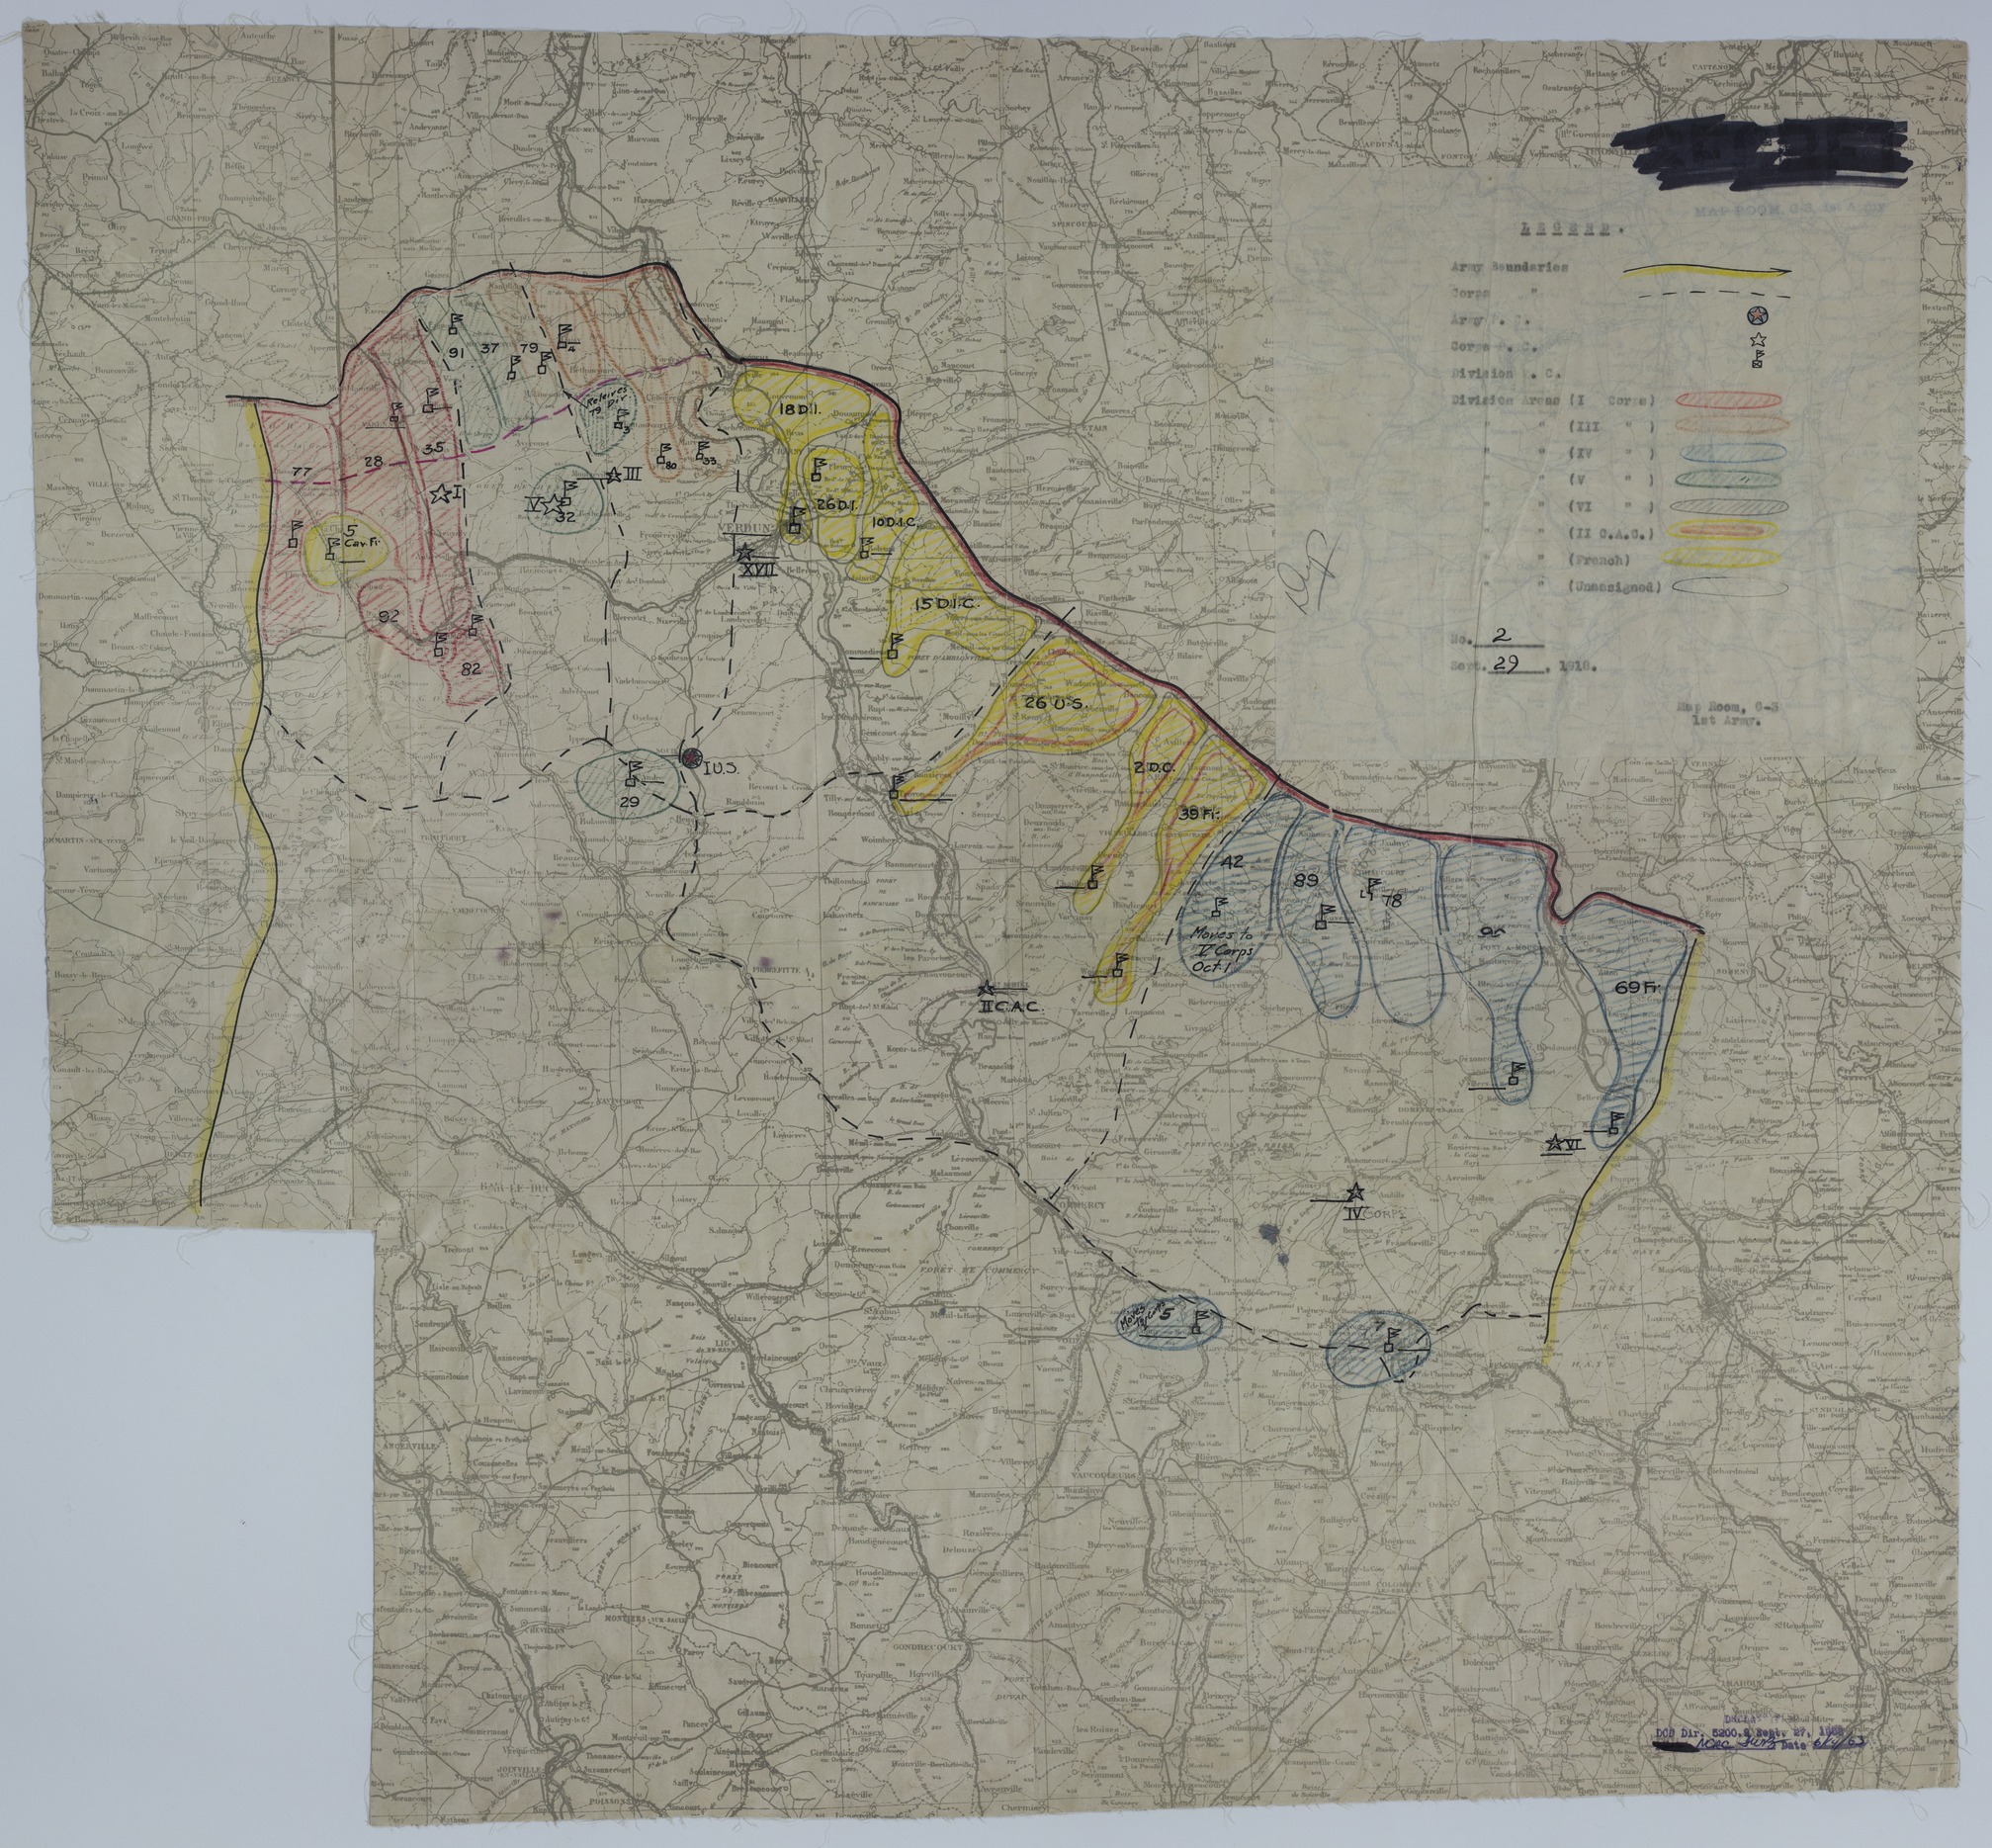 Map of Divisional Positions on September 29, 1918